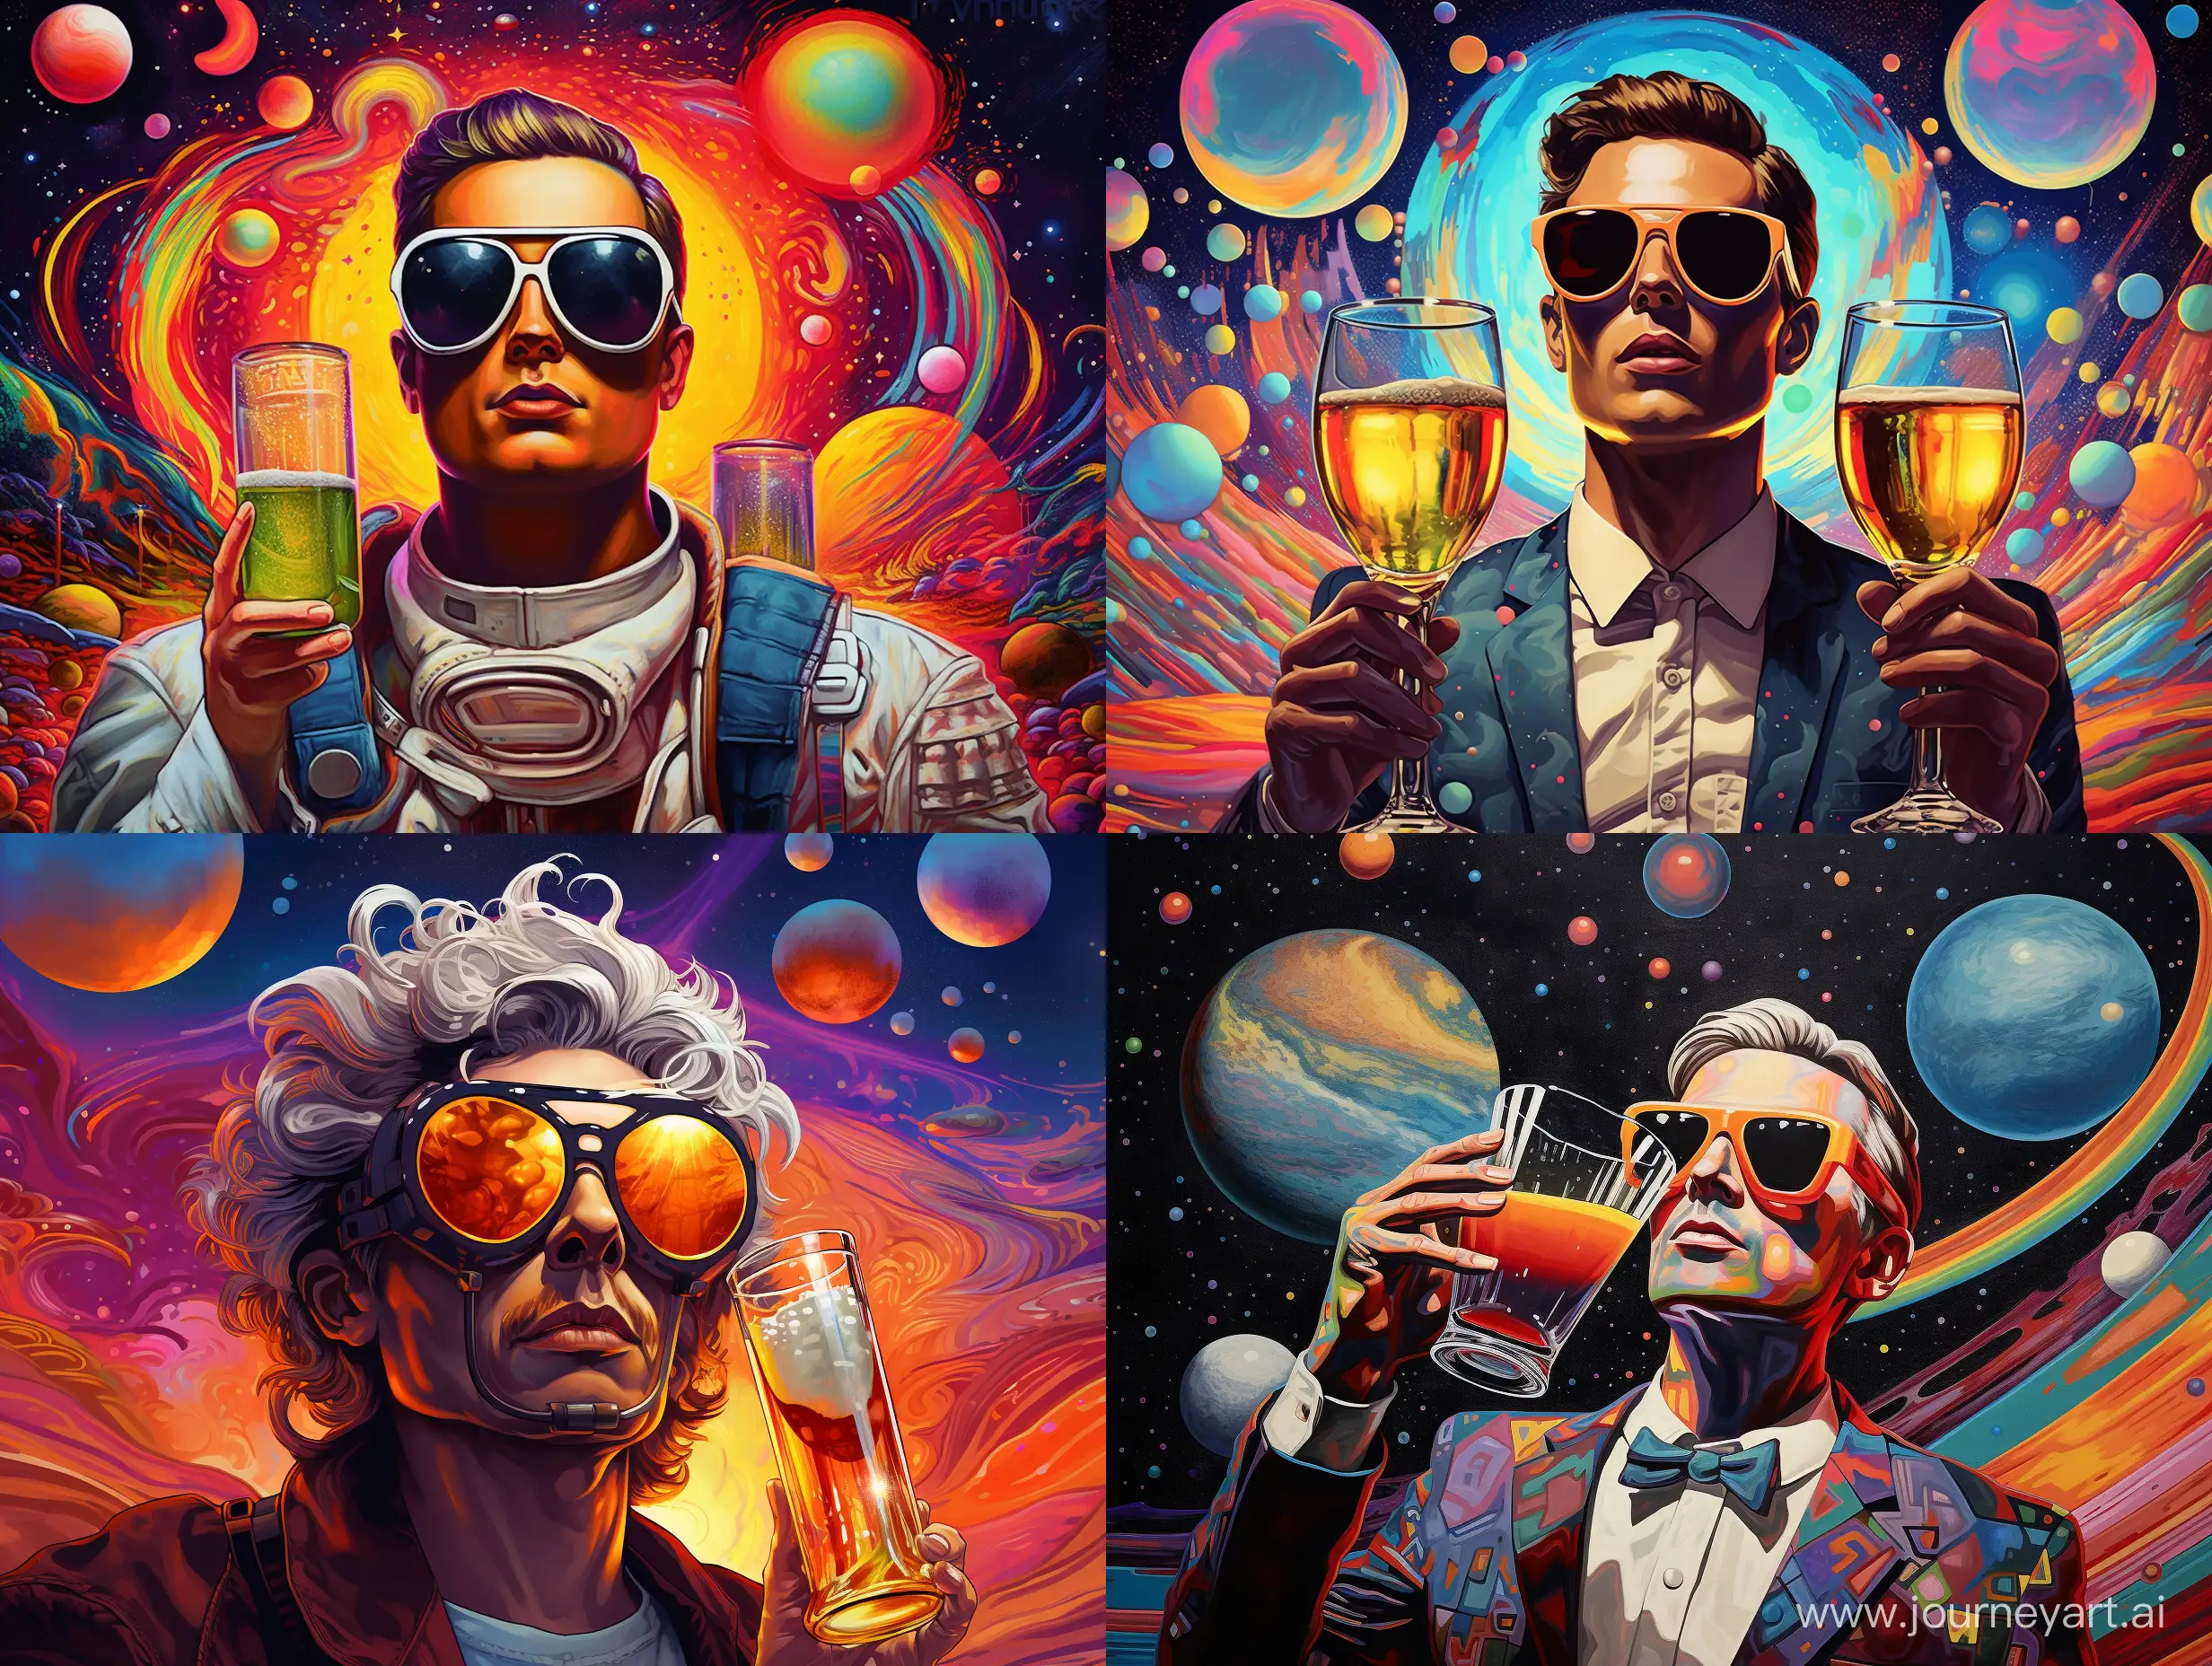 Man-Enjoying-Futuristic-Space-Adventure-with-Magic-Glasses-and-Beer